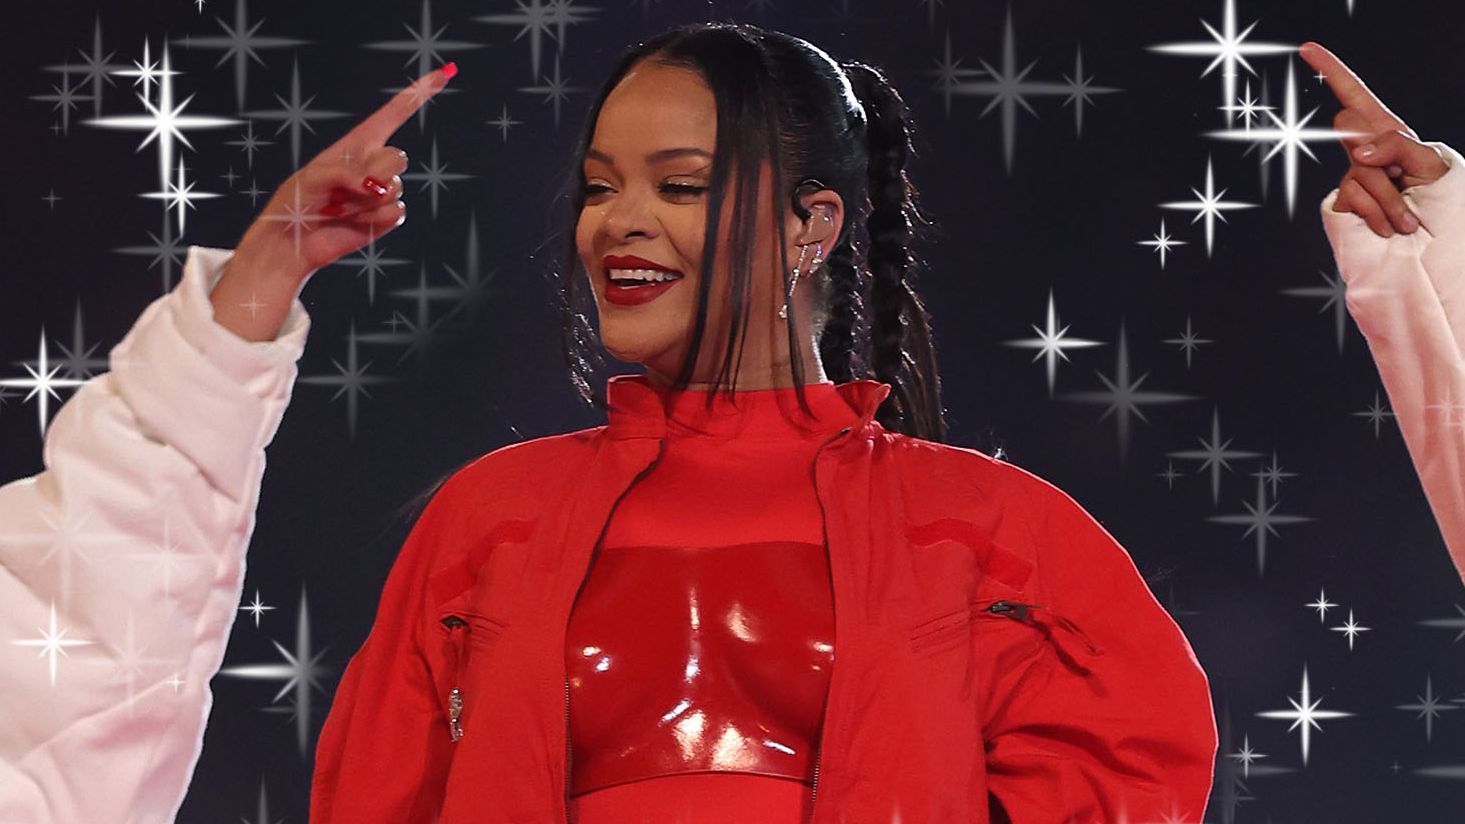 The Internet Simply Cannot Handle How Stunning Rihanna's Latest